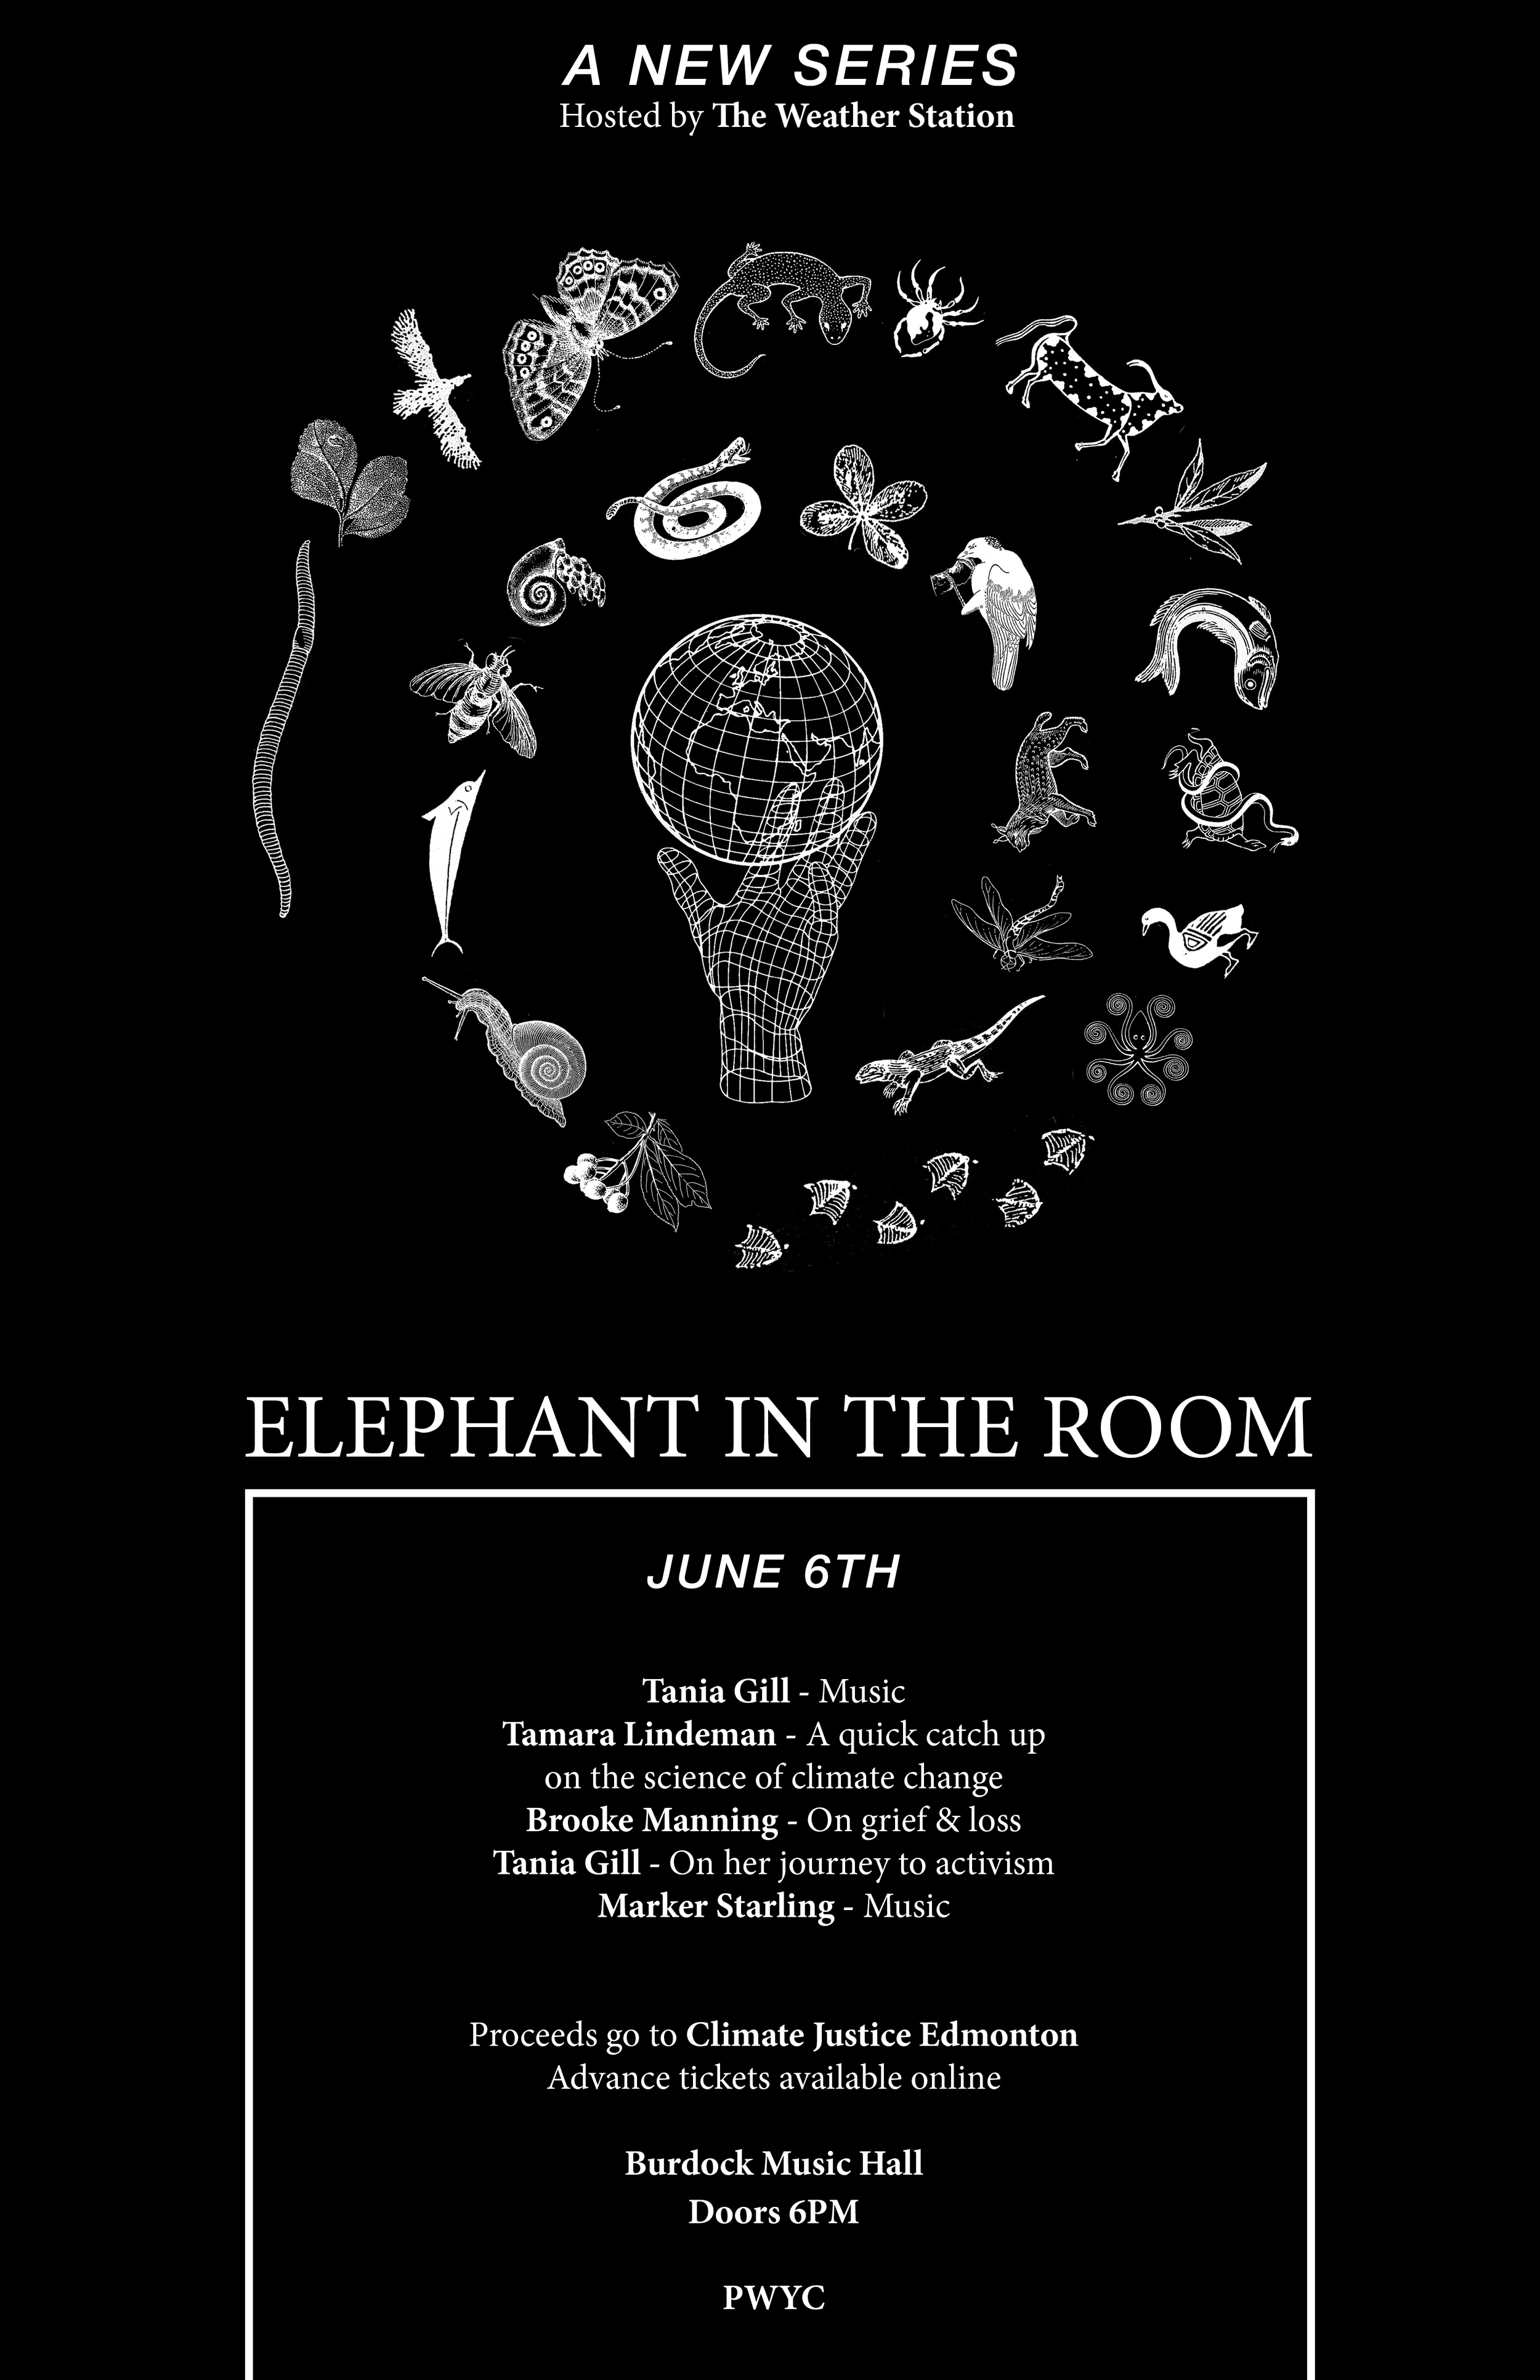  Elephant in the room  Illustration by Alicia Nauta  Layout by Melissa Richards  2019 